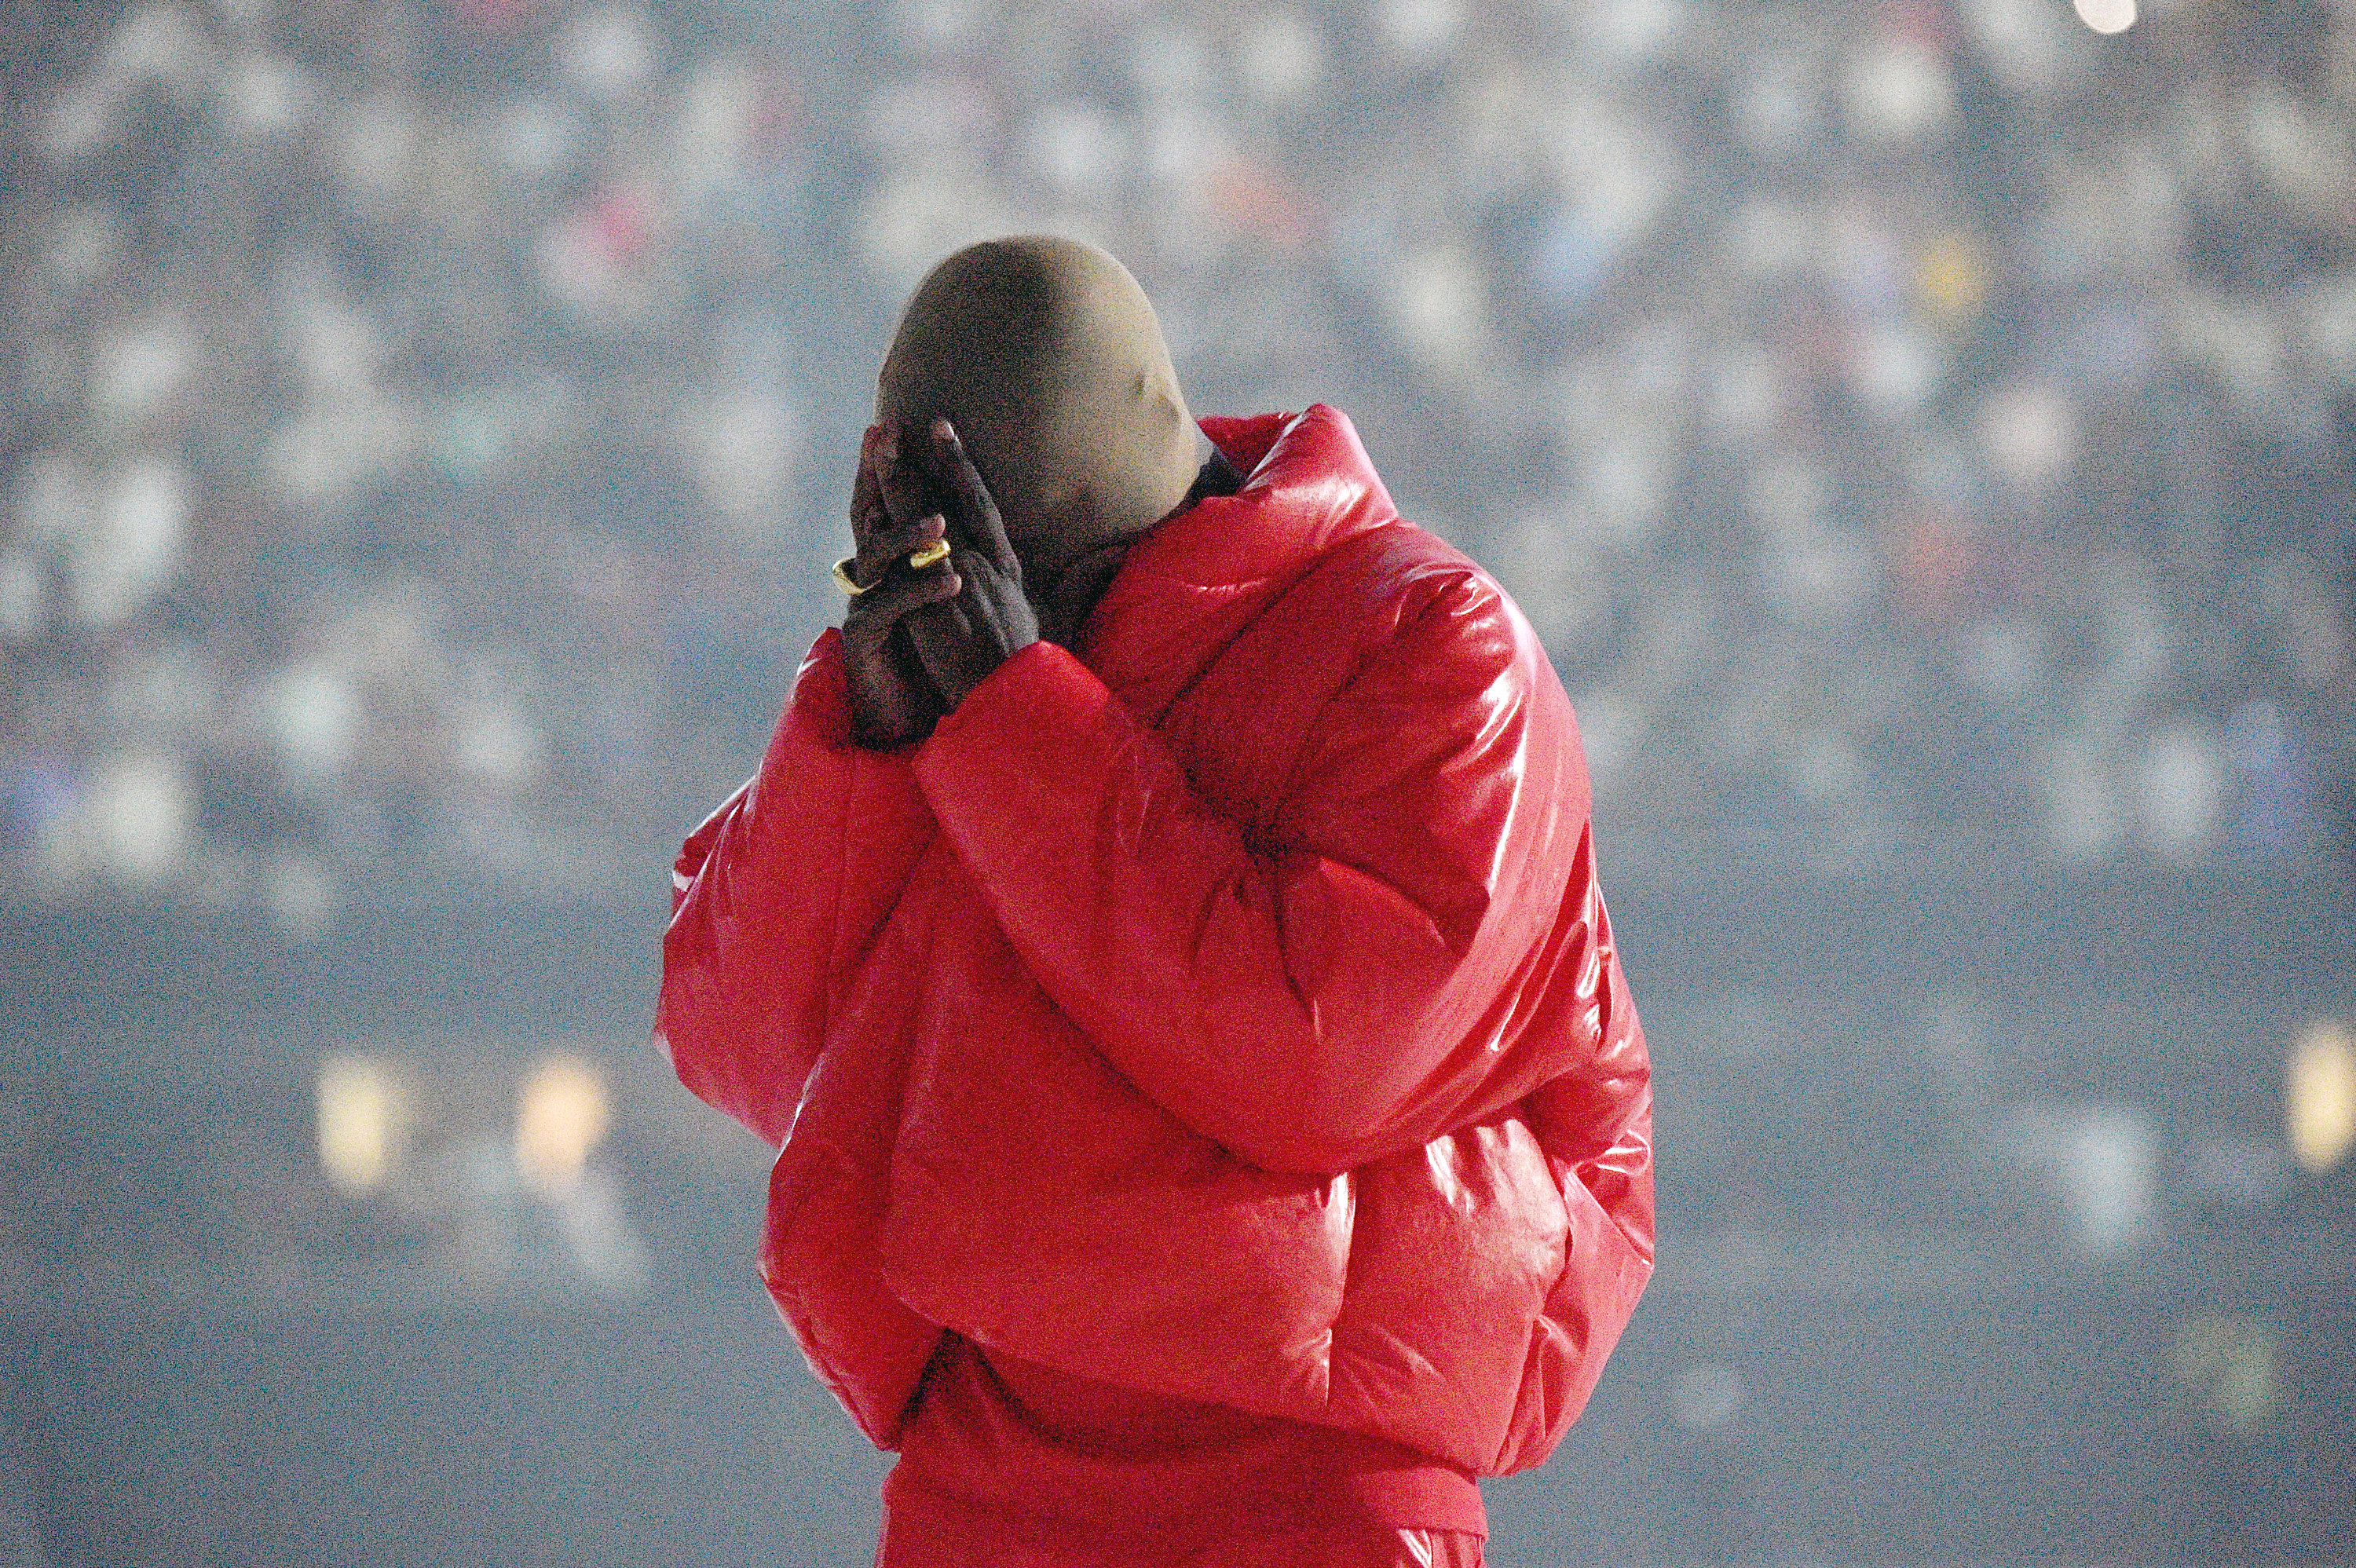 Kanye holding his stockinged head in his hands and wearing a bubble jacket